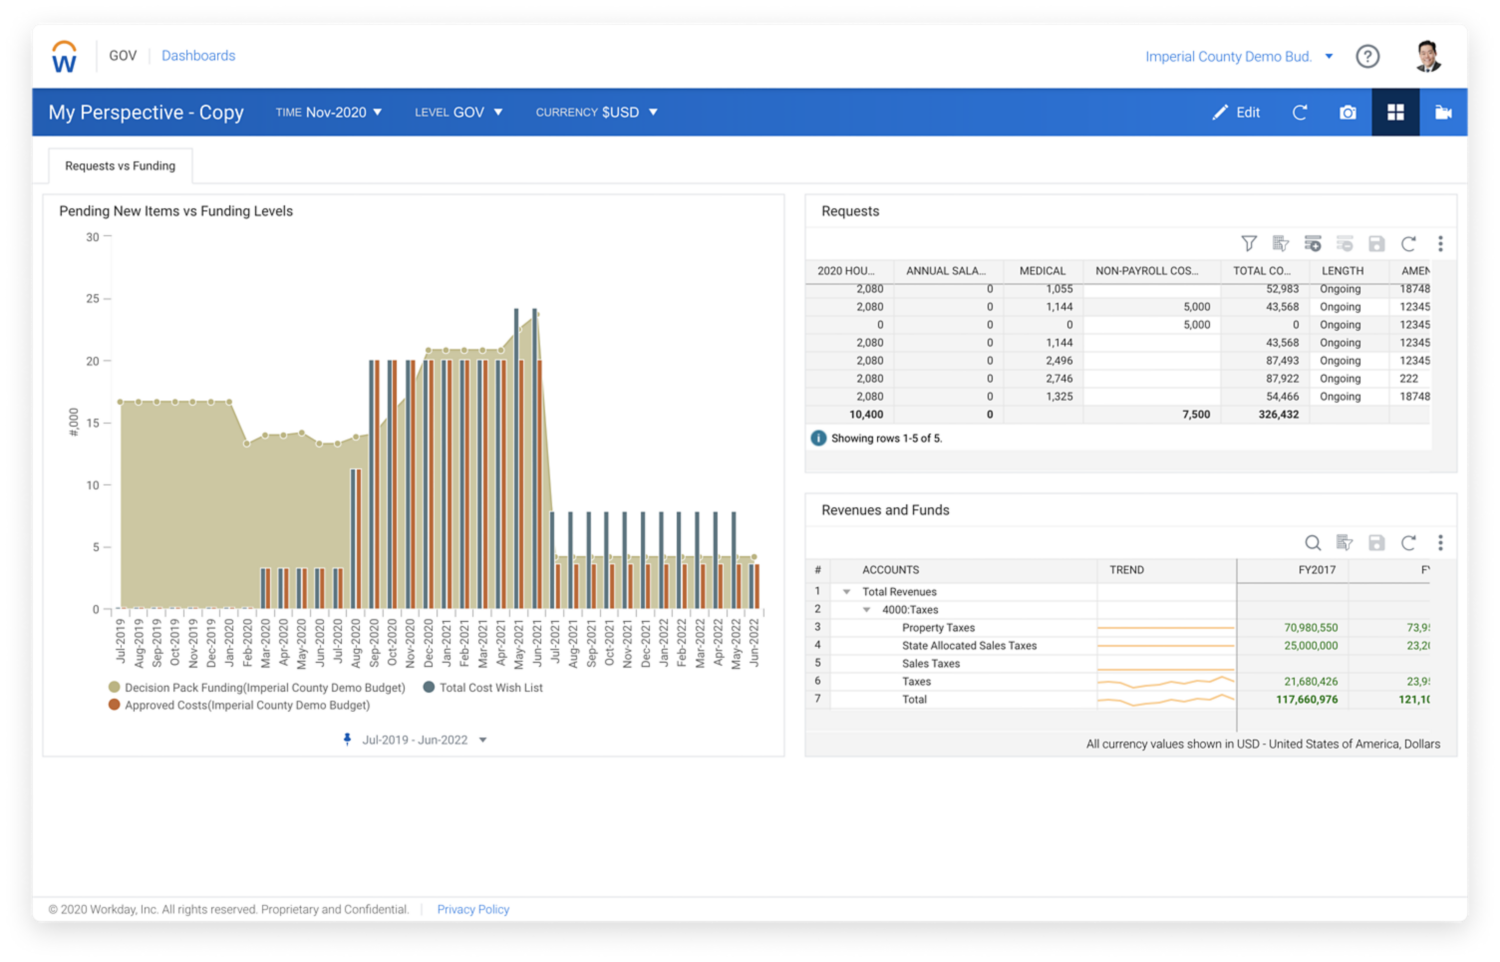 Workday Adaptive Planning for Government, Decision Pack Funding Dashboard